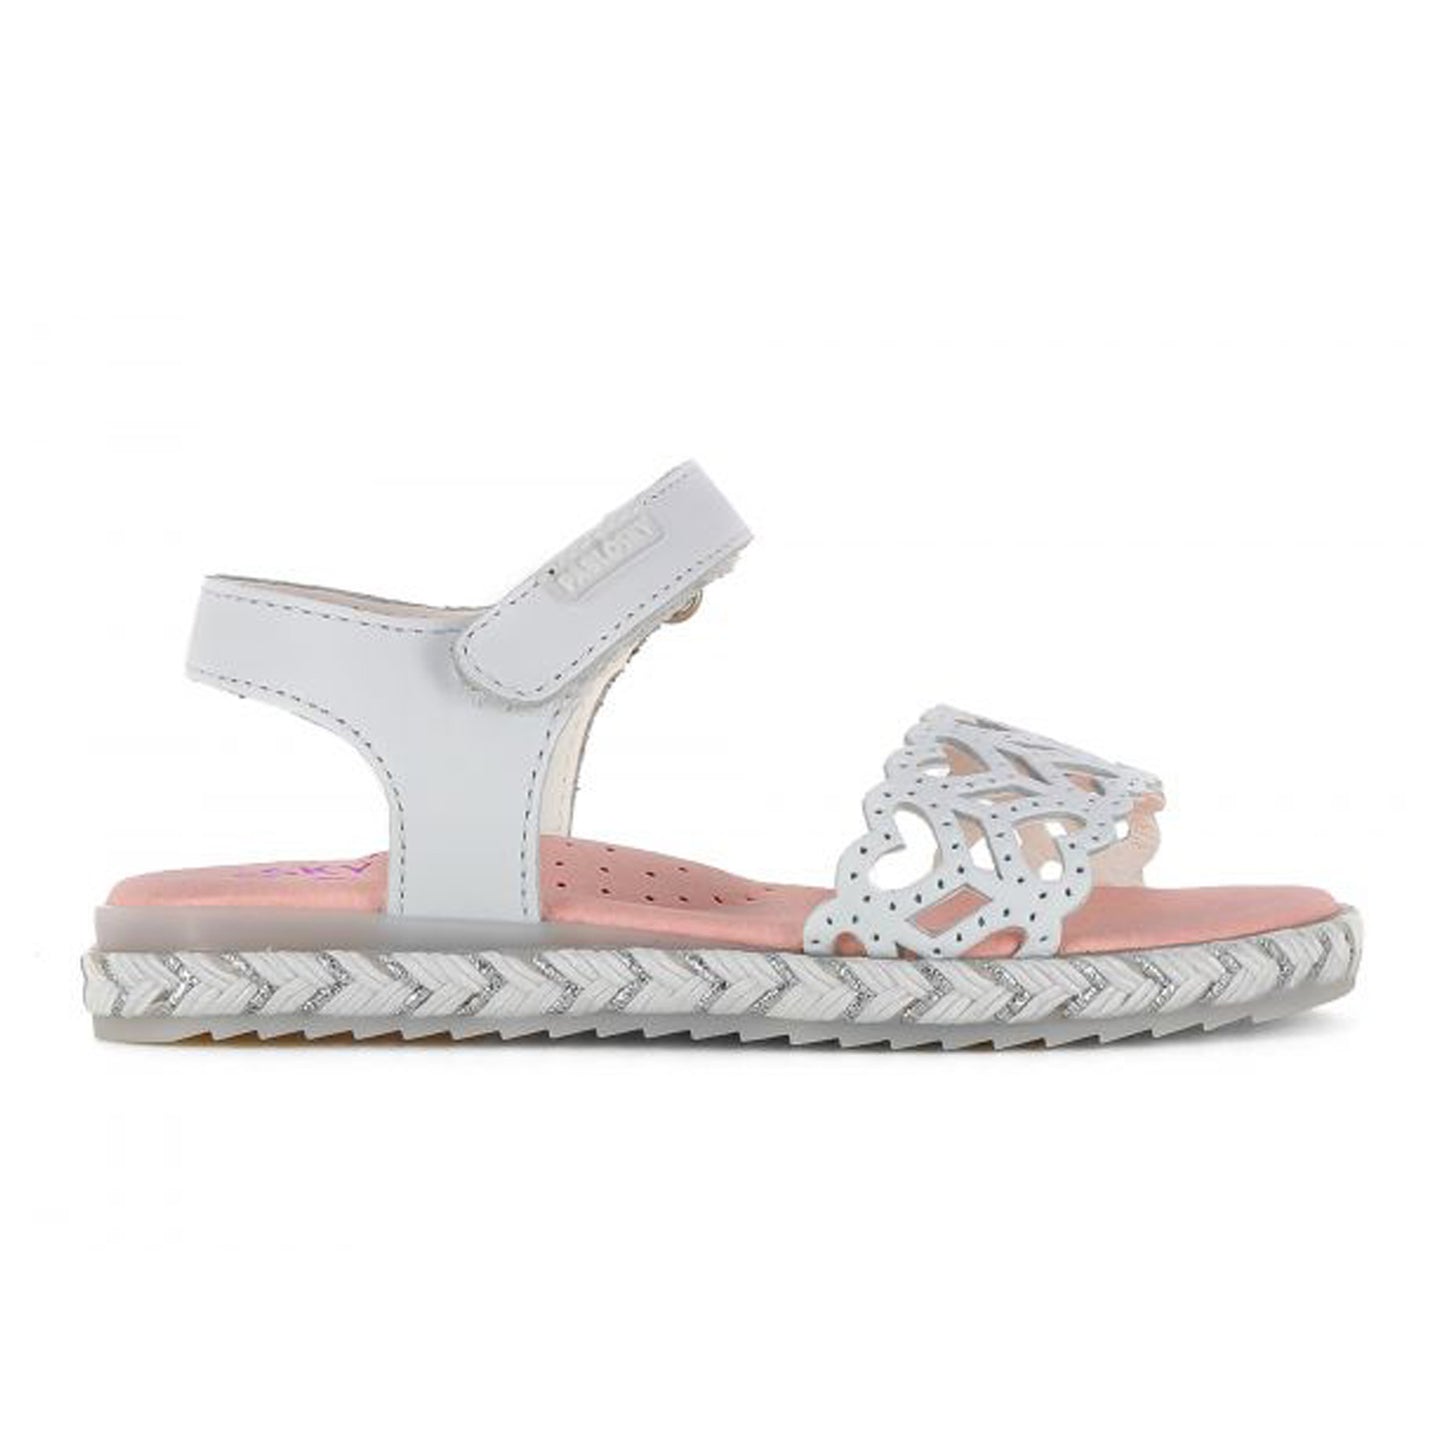 Pablosky Olympo Sandals